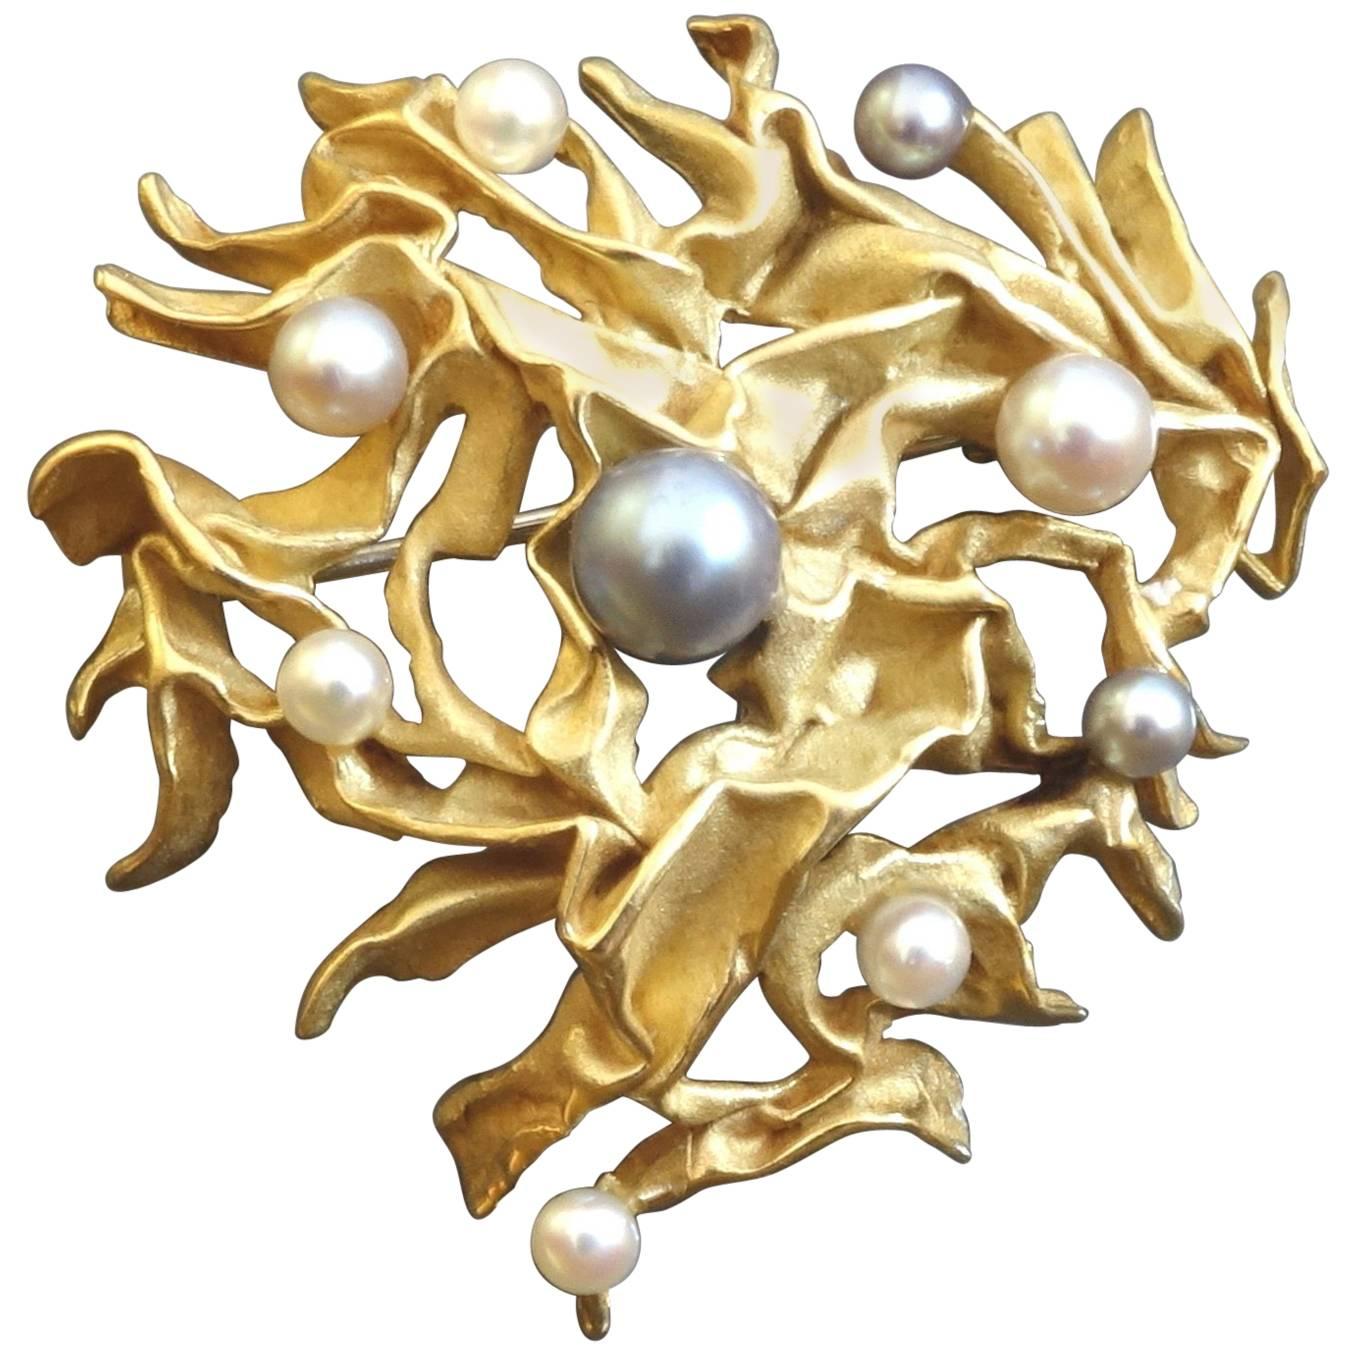 1970s Modernist Organic Free-Form Pearl Gold Brooch Pendant For Sale